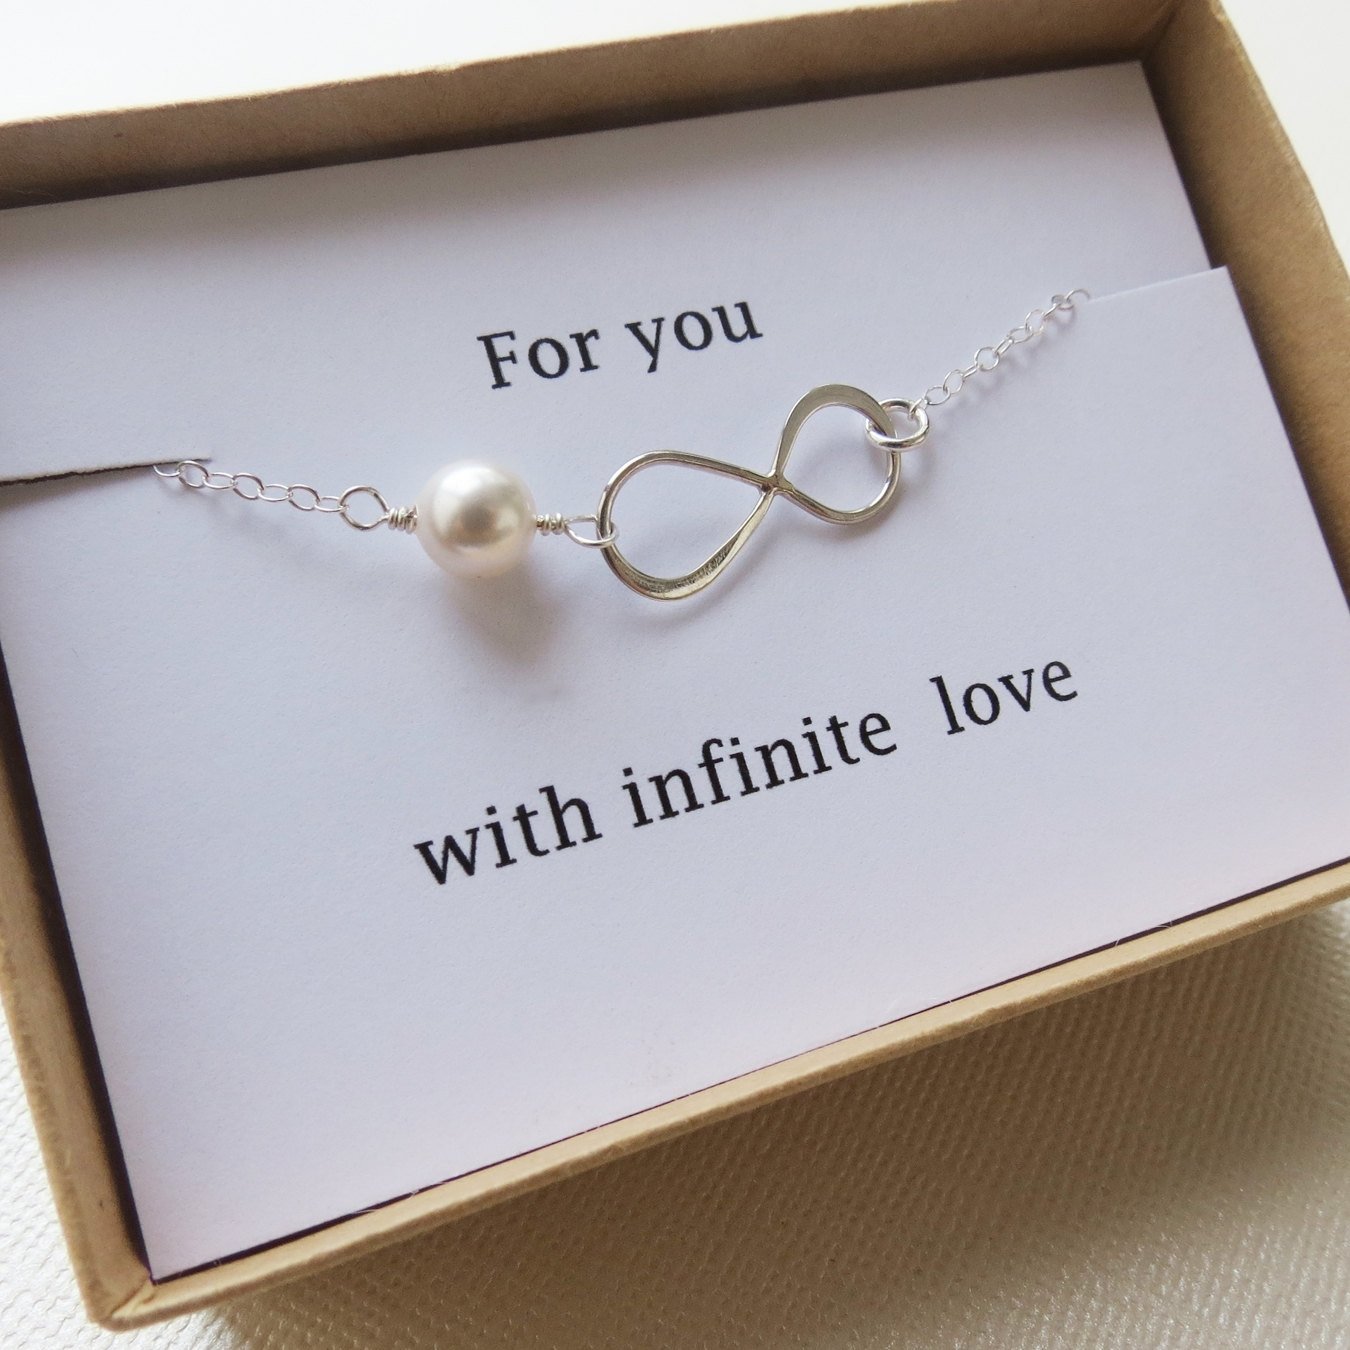 10 Fashionable Christmas Gift Ideas For New Girlfriend infinity bracelet love holiday gift infinity jewelry card 5 2022